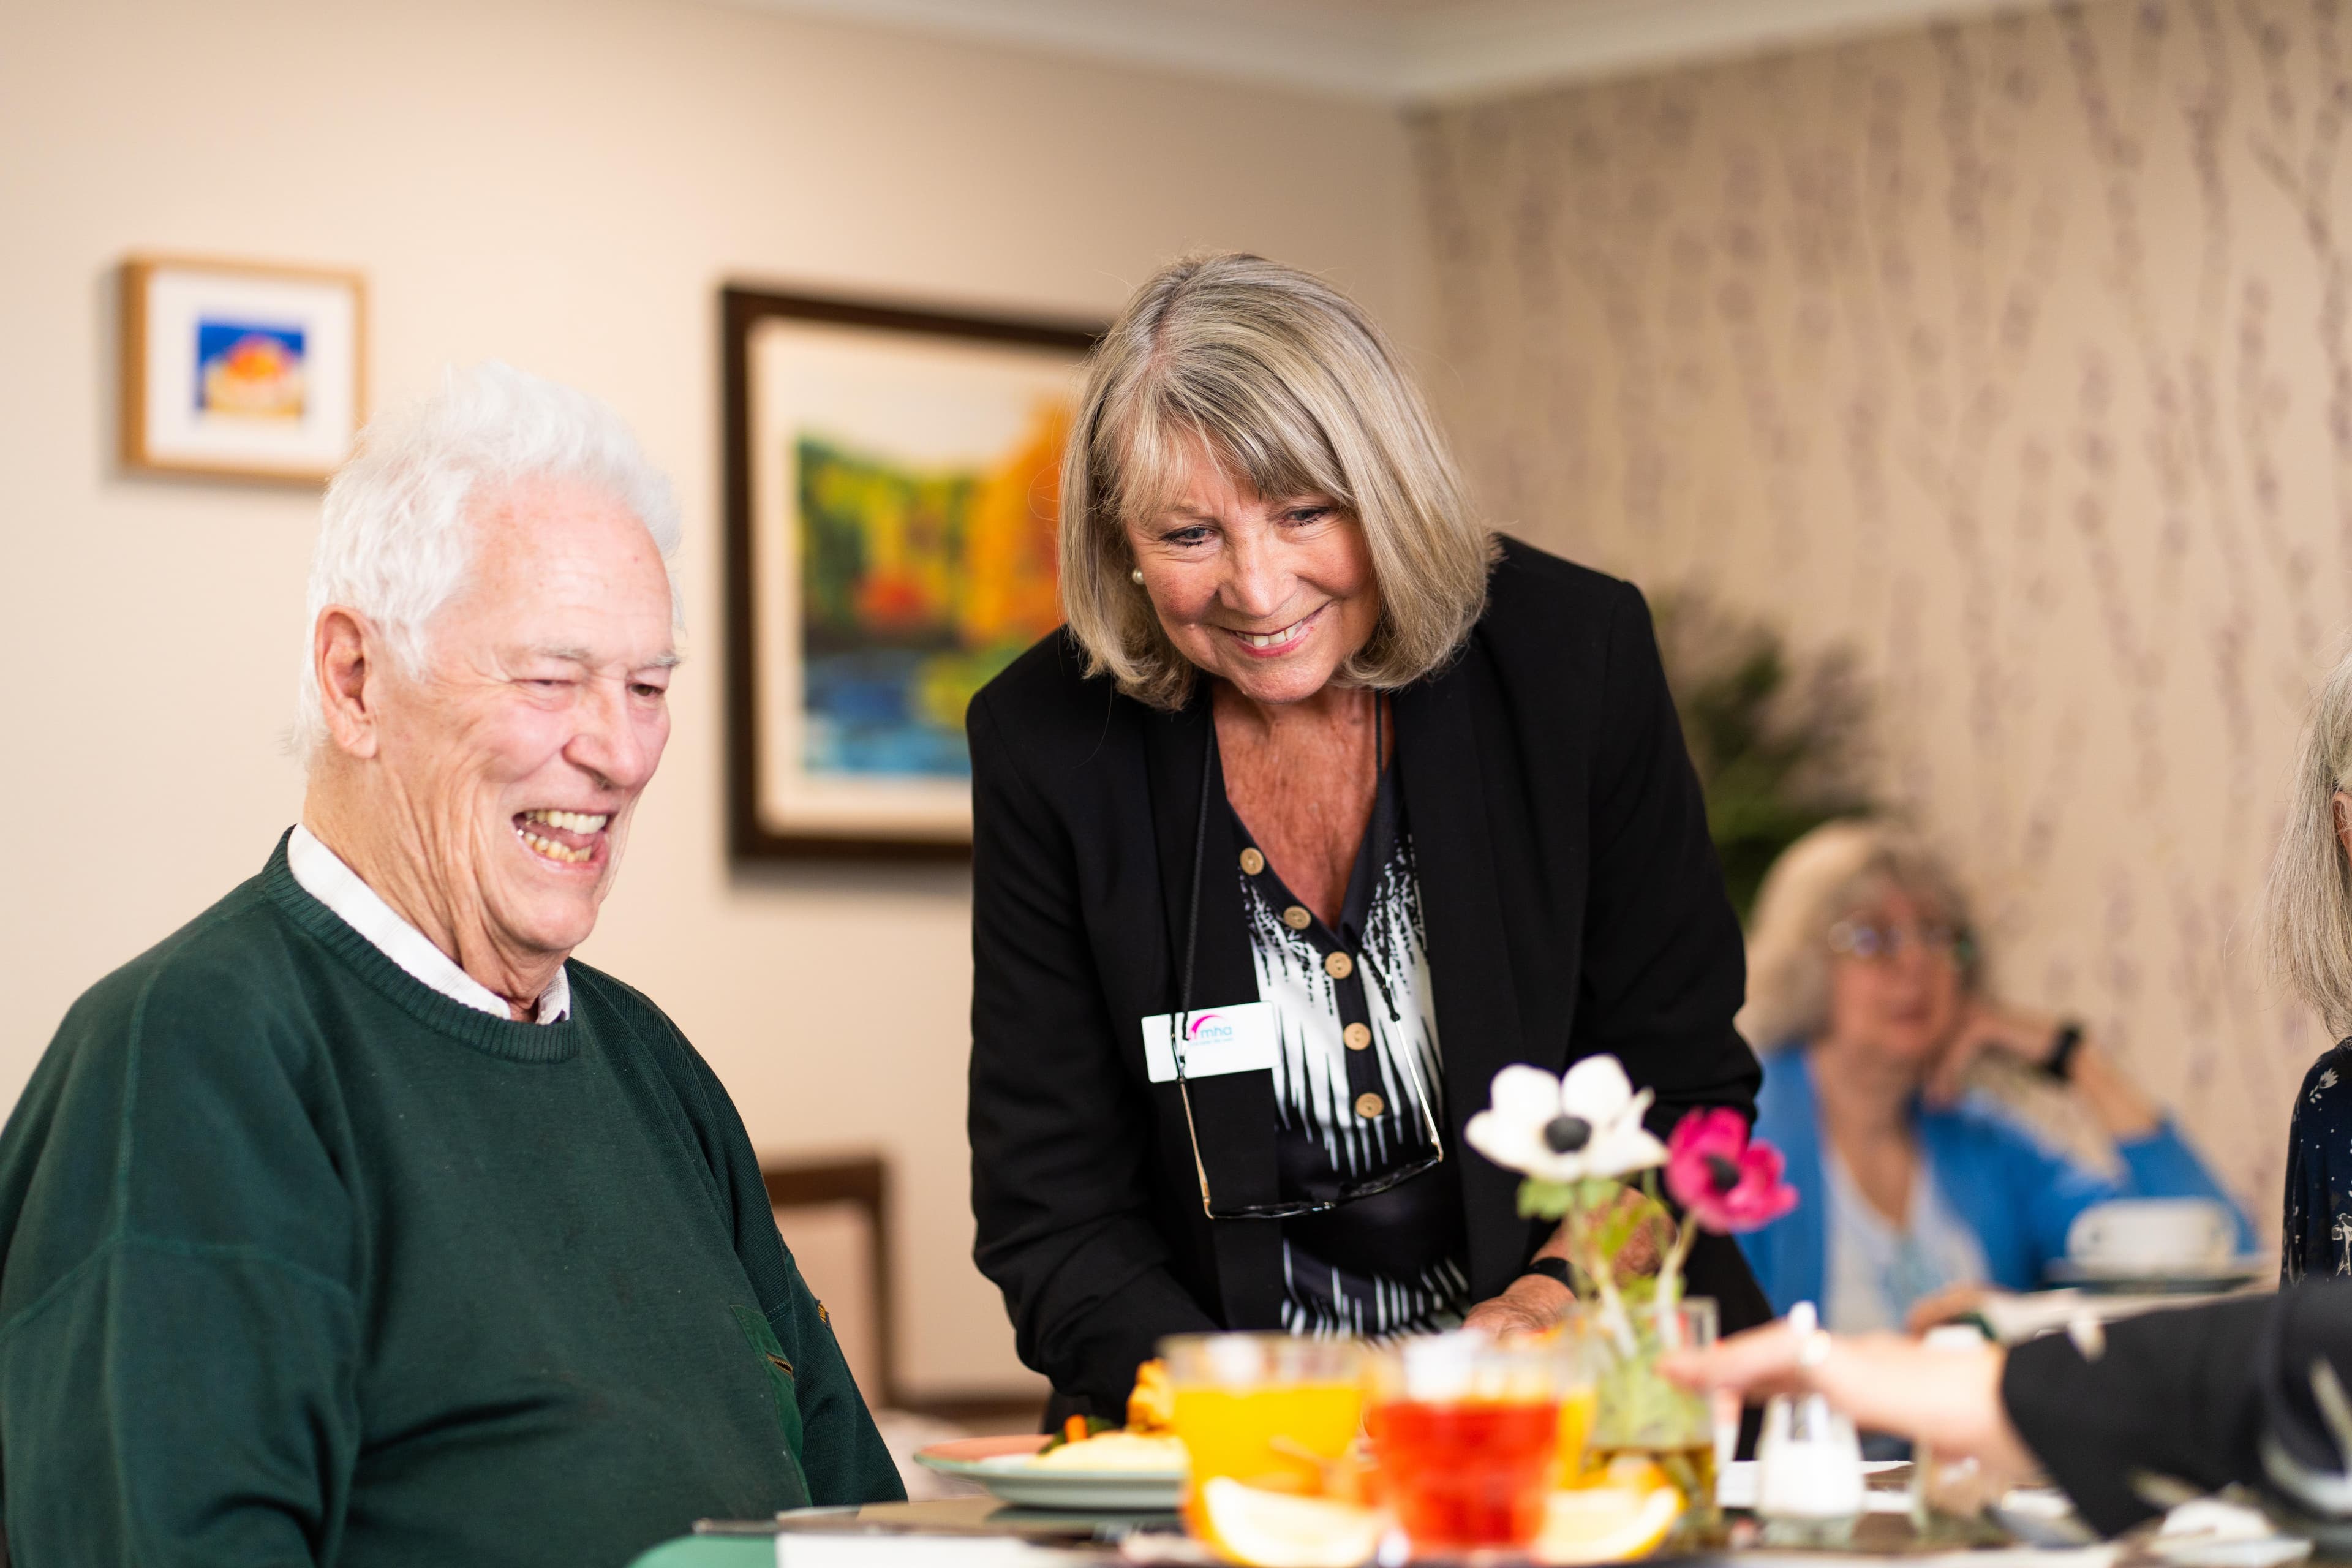 Care home manager speaking to male resident at dining table